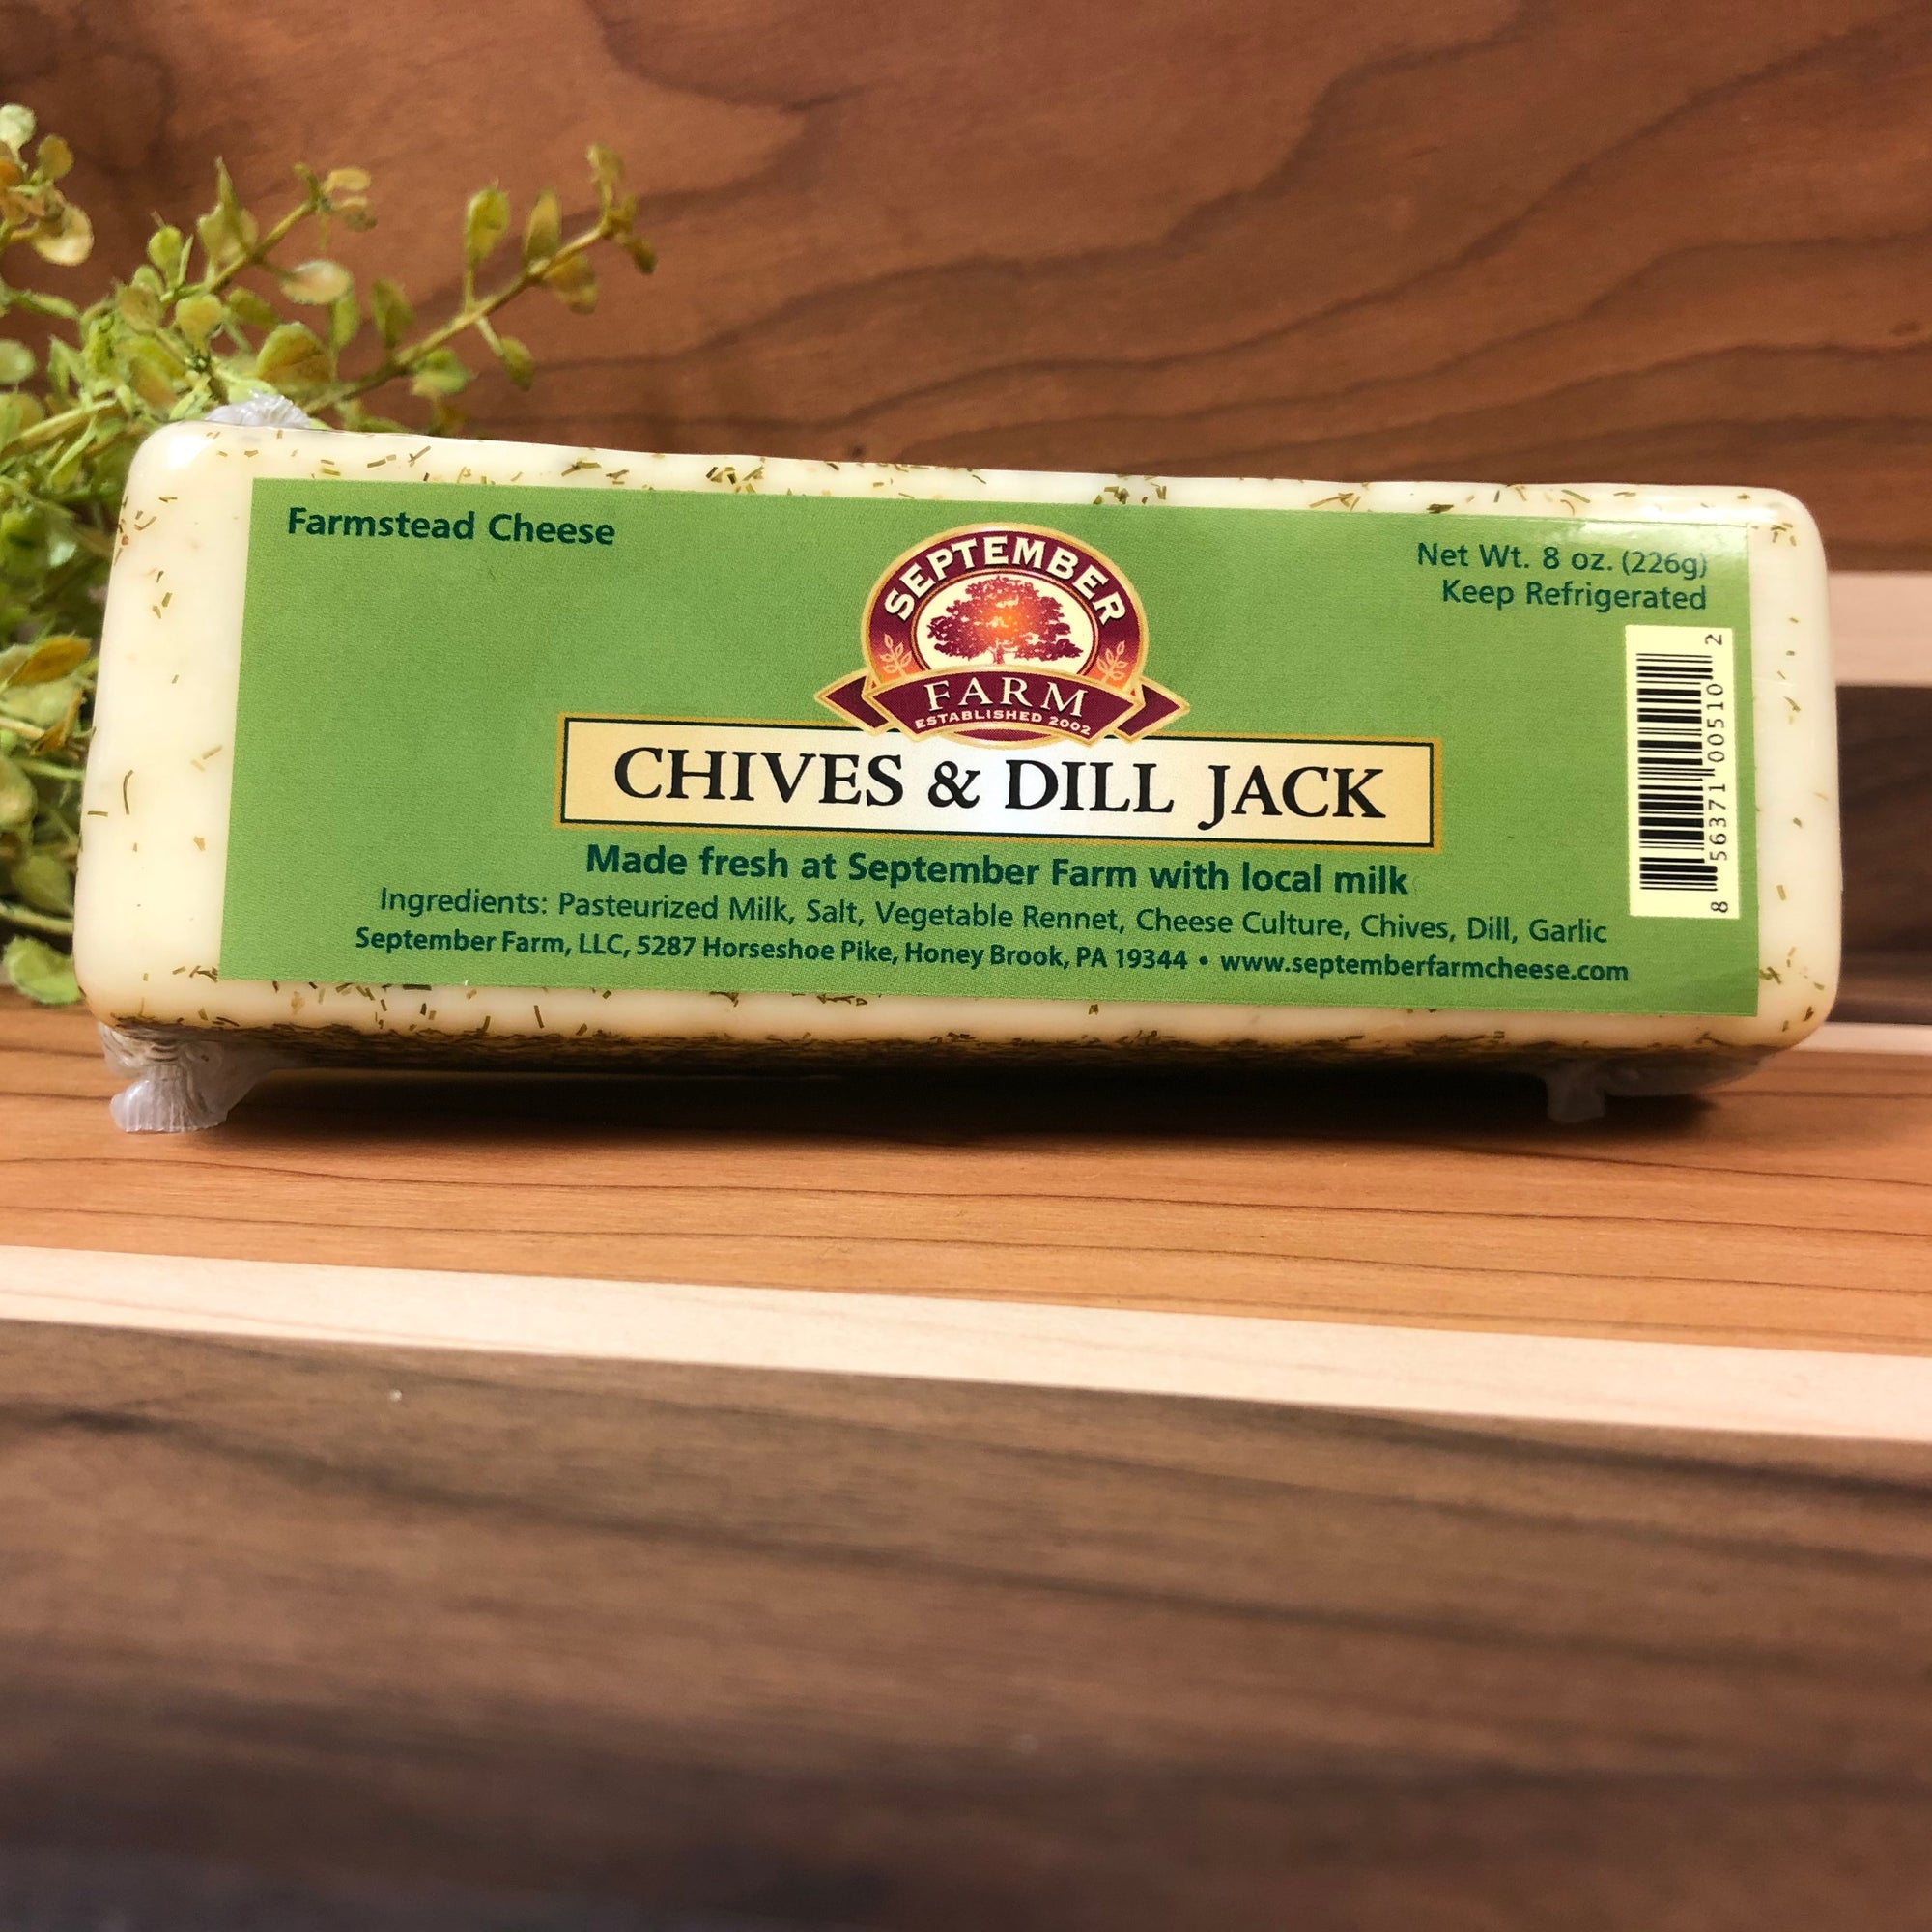 Chives & Dill Jack